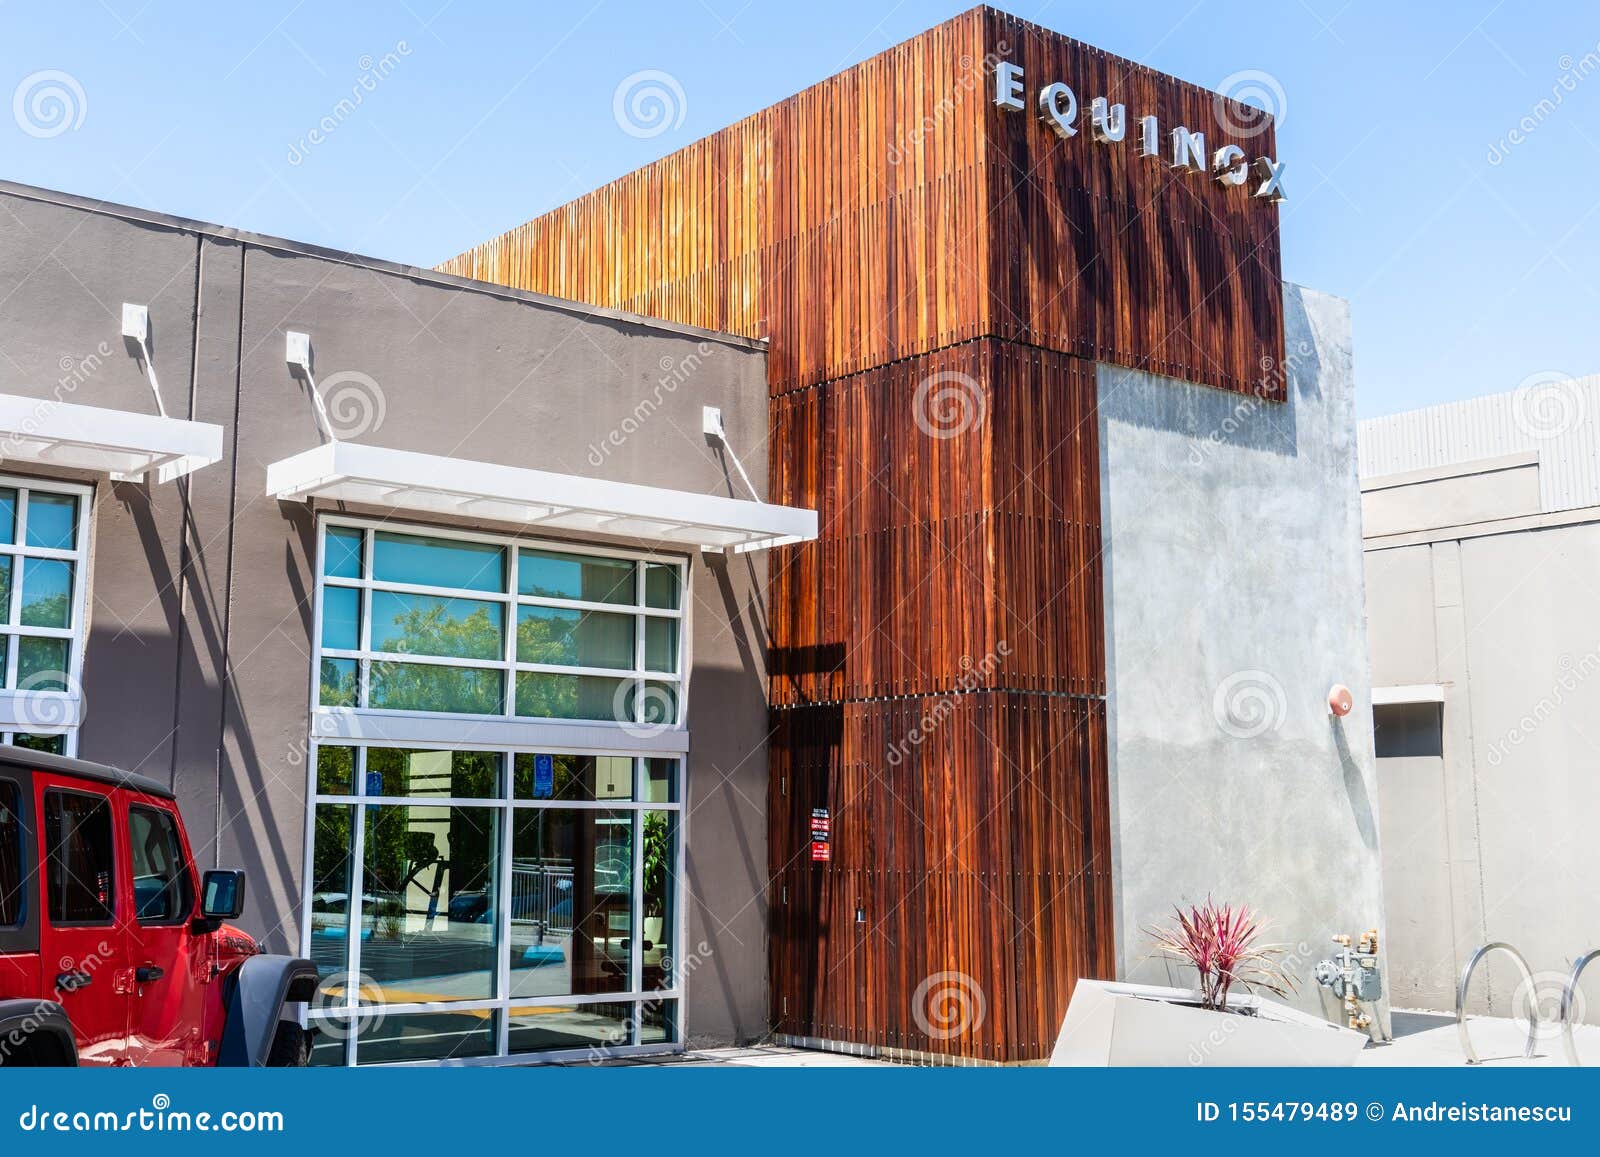 August 8, 2019 Palo Alto / CA / USA - Exterior View Of The Upscale ...